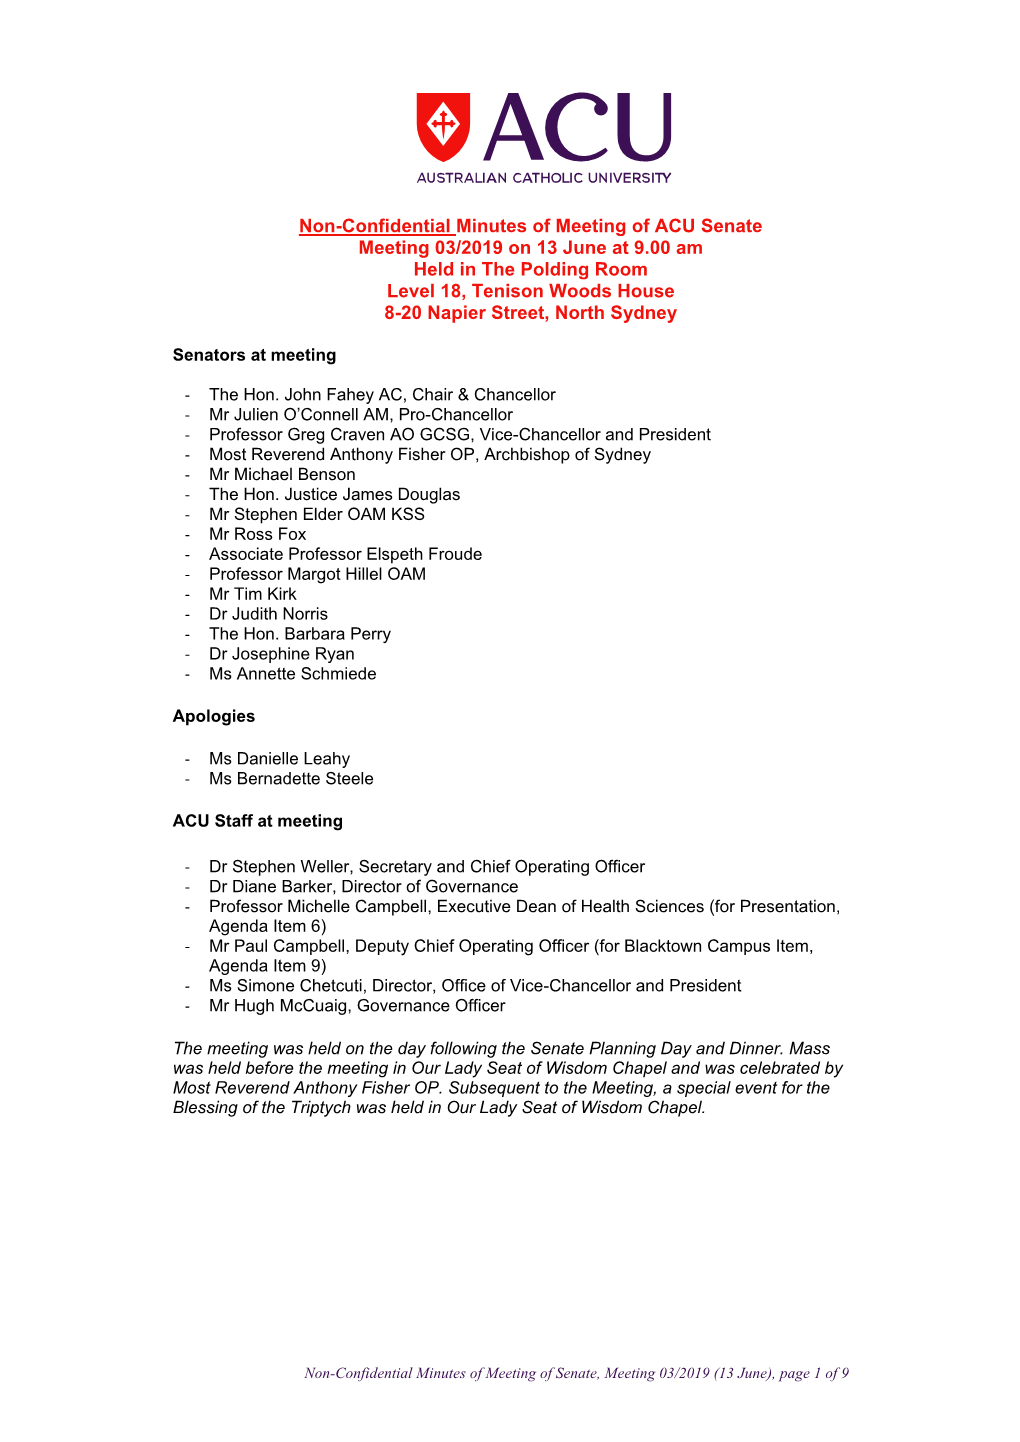 Non-Confidential Minutes of Meeting of ACU Senate Meeting 03/2019 On